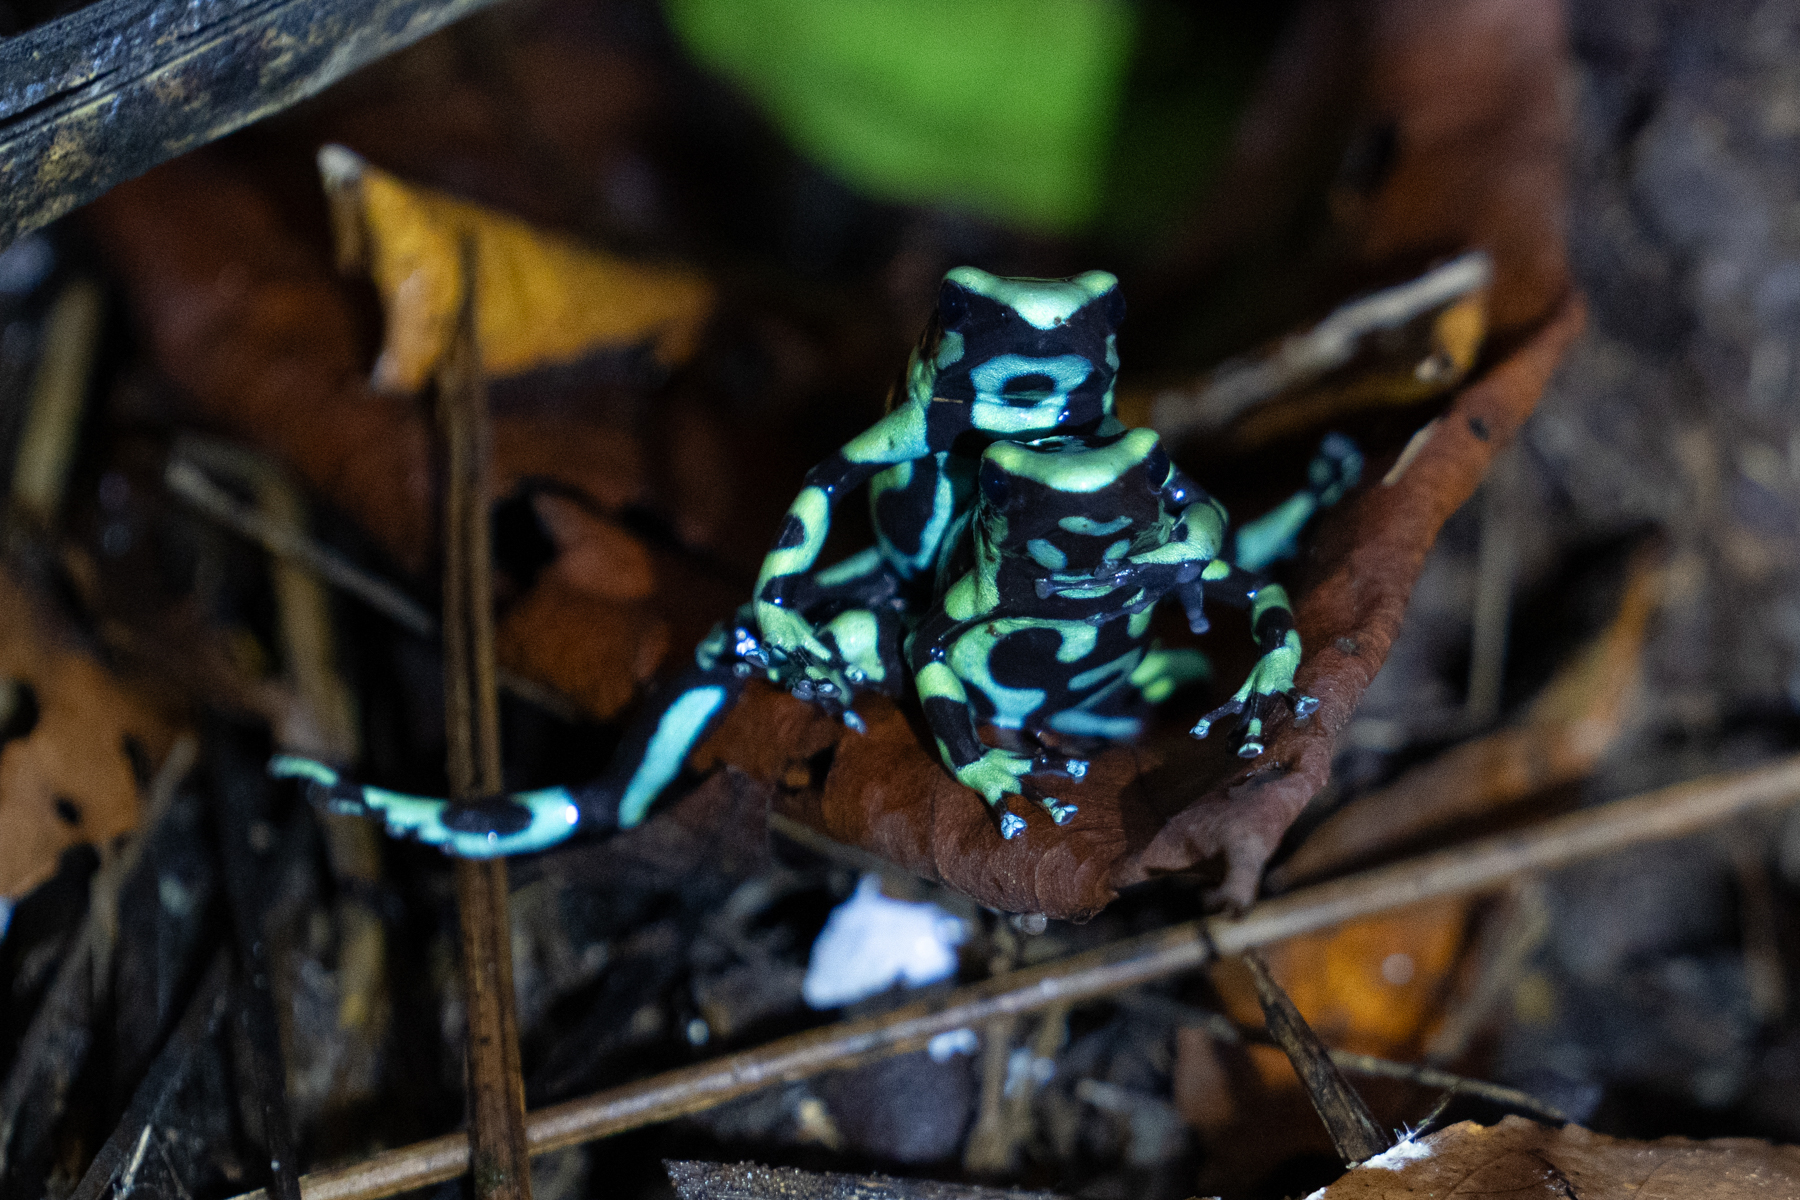 A pair of male Green & Black Poison Dart frogs tussle over territory (image by Inger Vandyke)